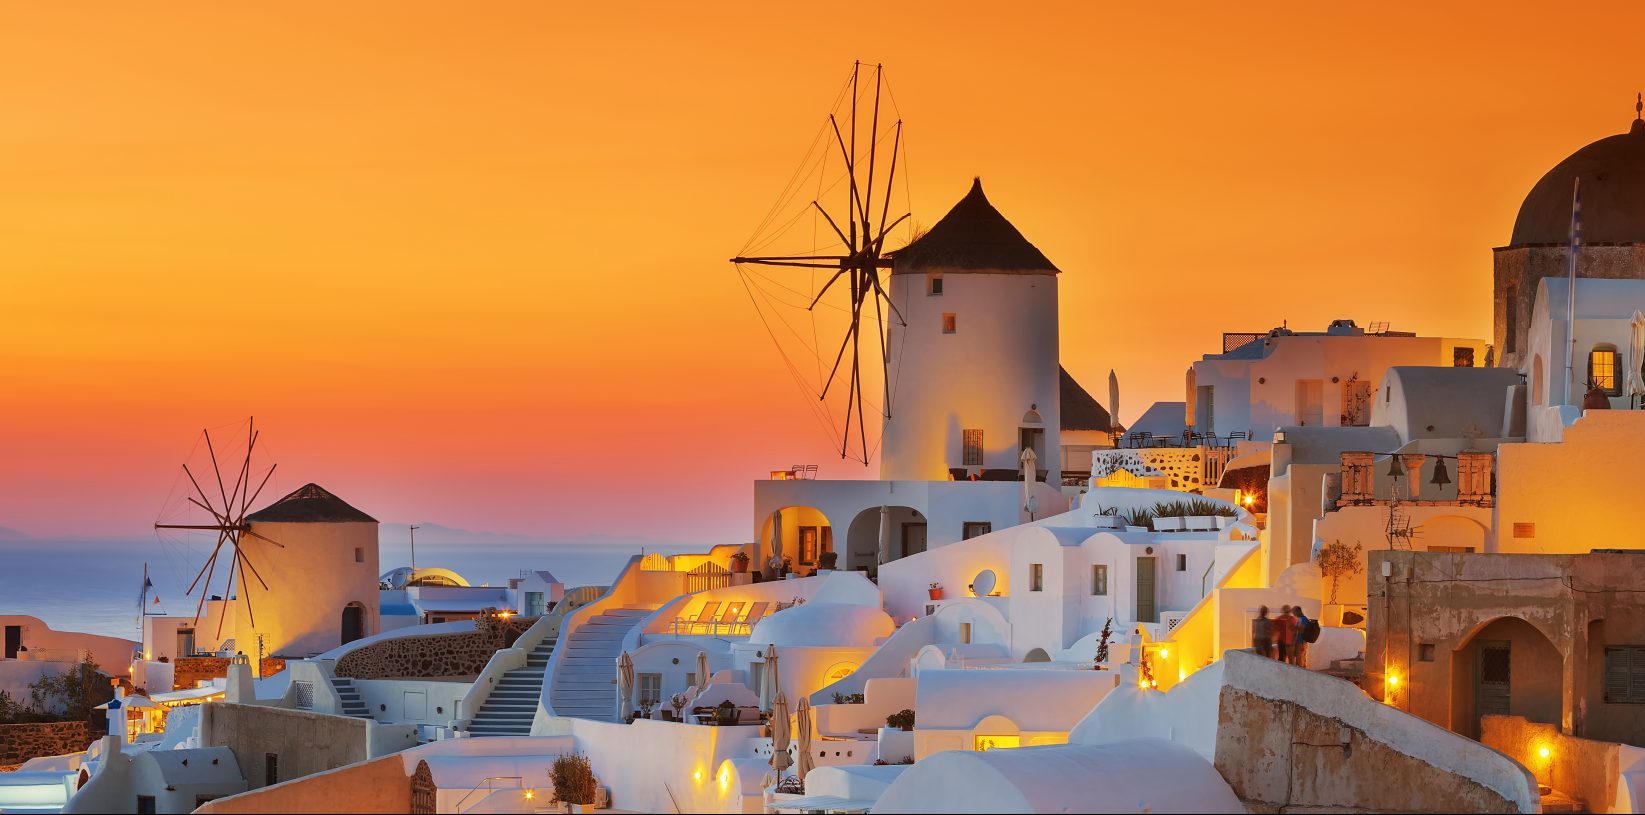 One of the world's most beautiful sunsets can be witnessed at Oia in Santorini - Luxury Escapes